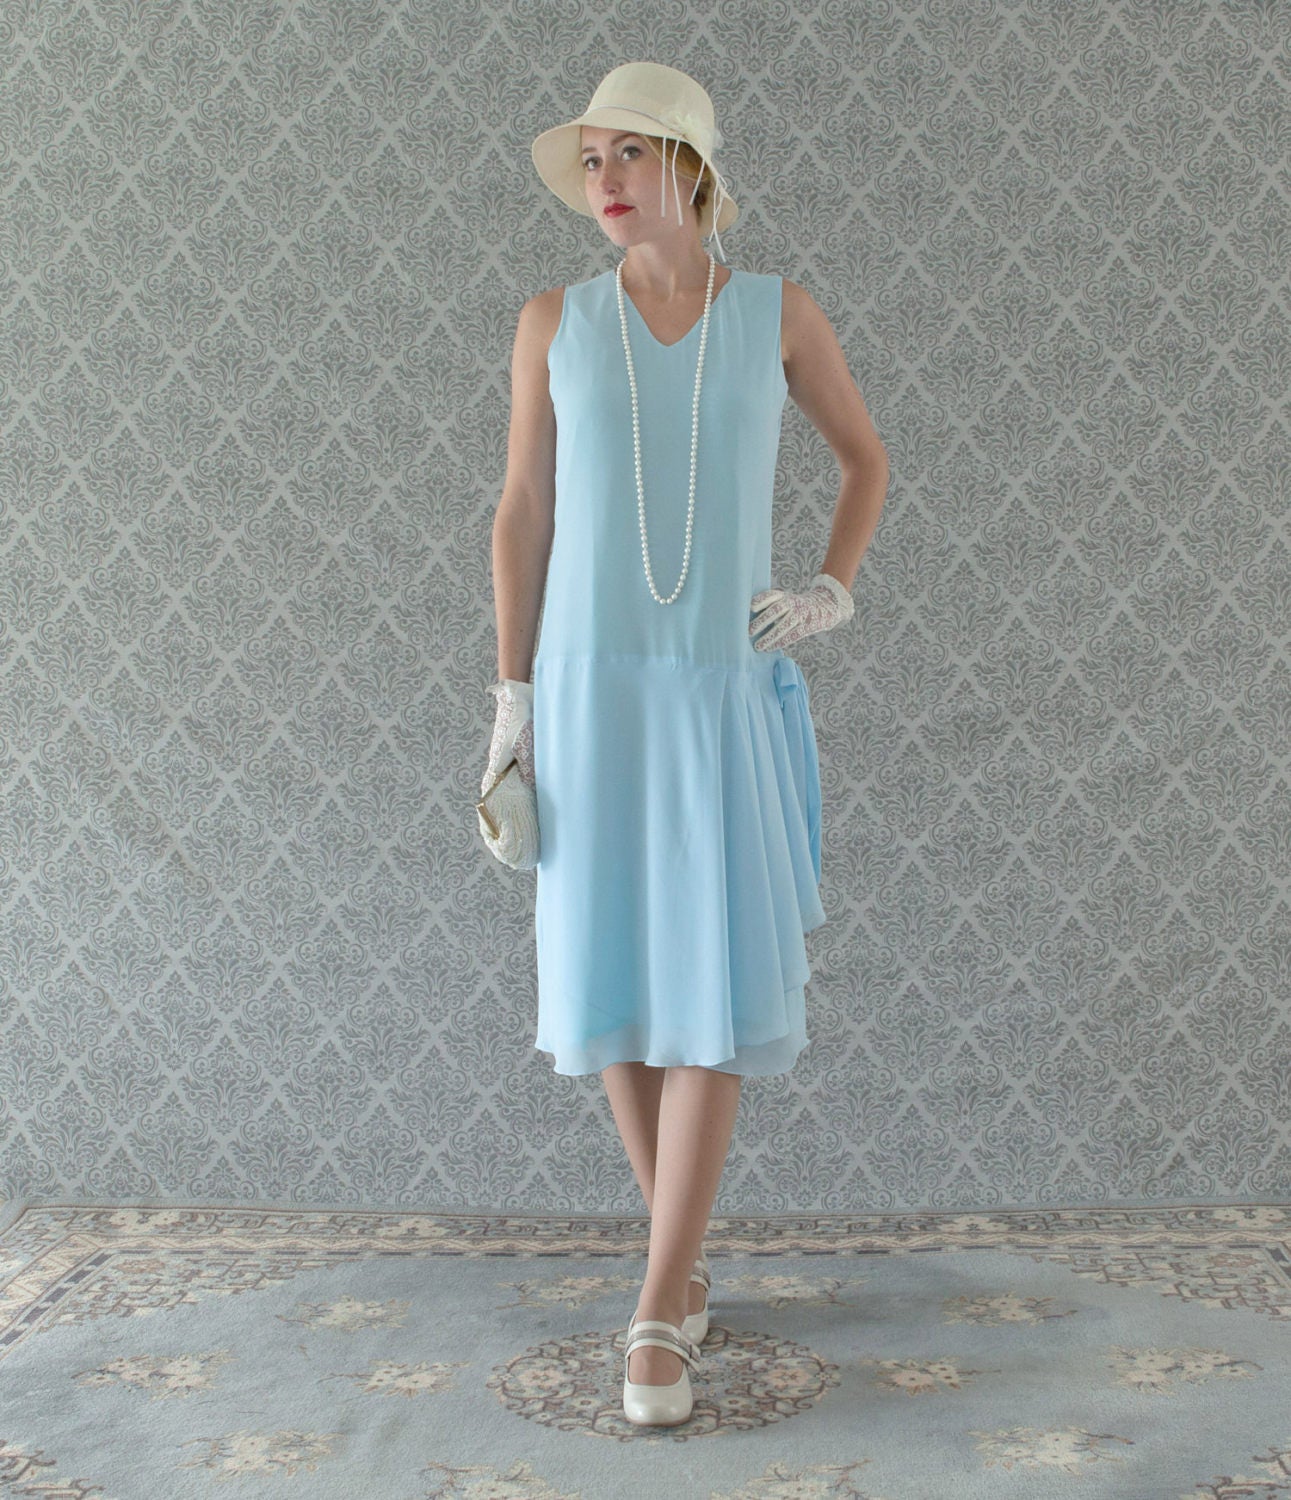 Light blue 1920s-inspired flapper dress with drape and bow